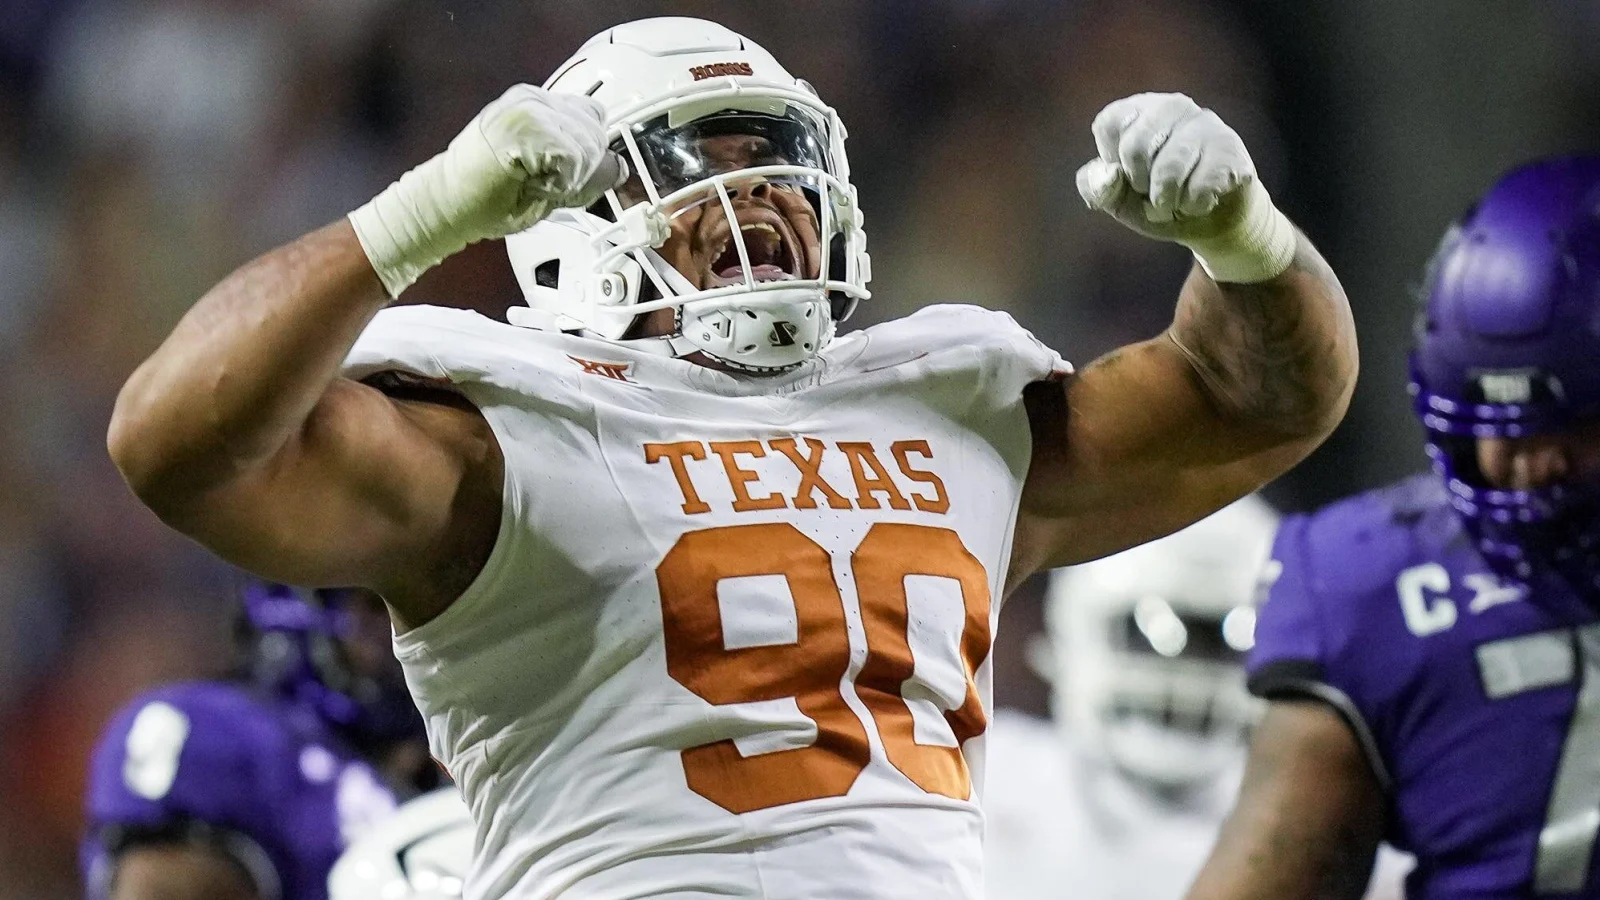  Byron Murphy II: From Texas Standout to Seattle Seahawks' Top Pick - A Draft Rise Story